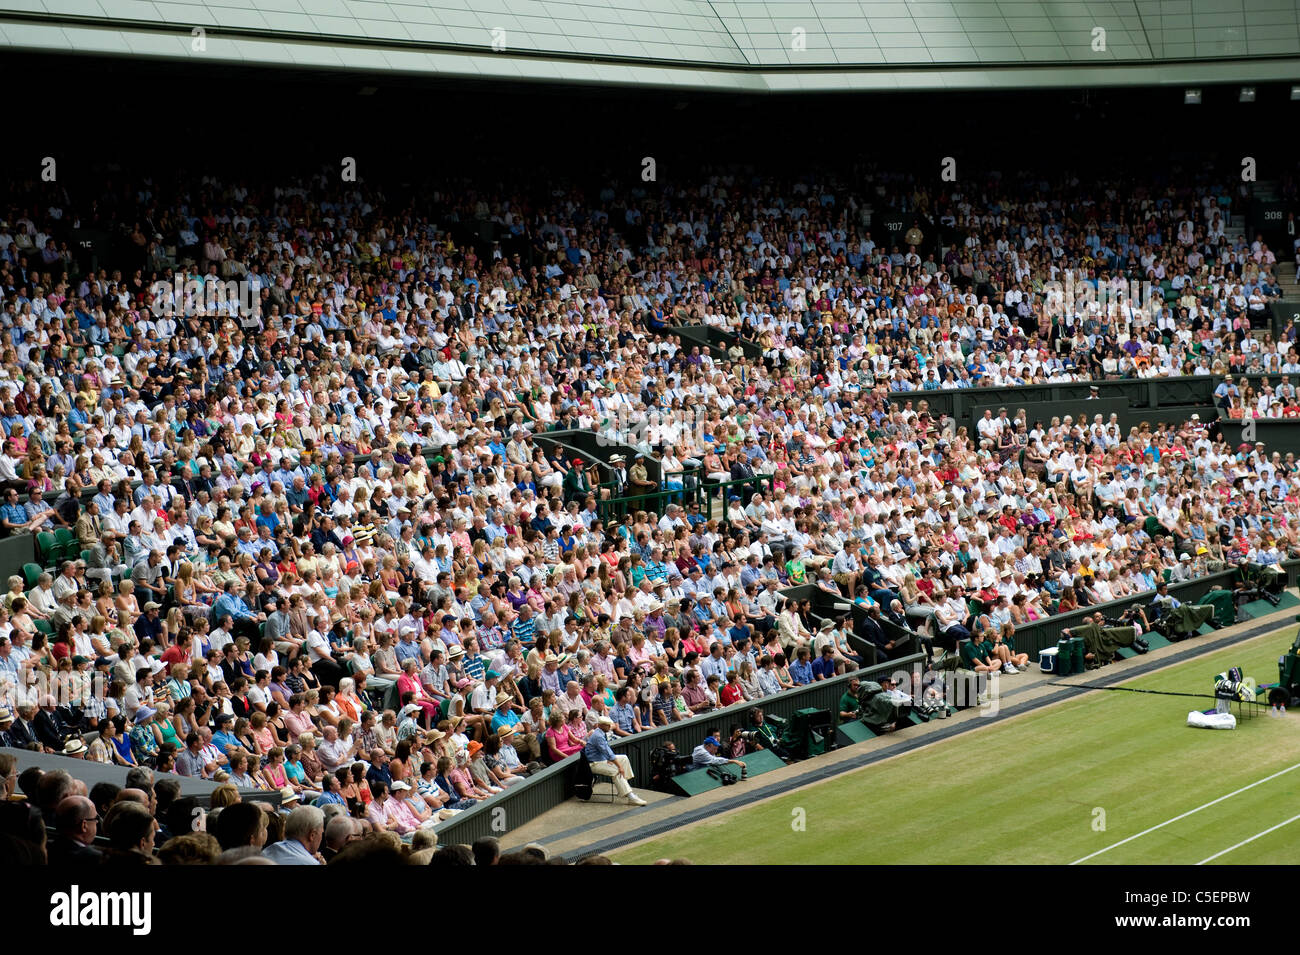 General view of Centre Court crowd during the Men's Singles Final at the 2011 Wimbledon Tennis Championships Stock Photo